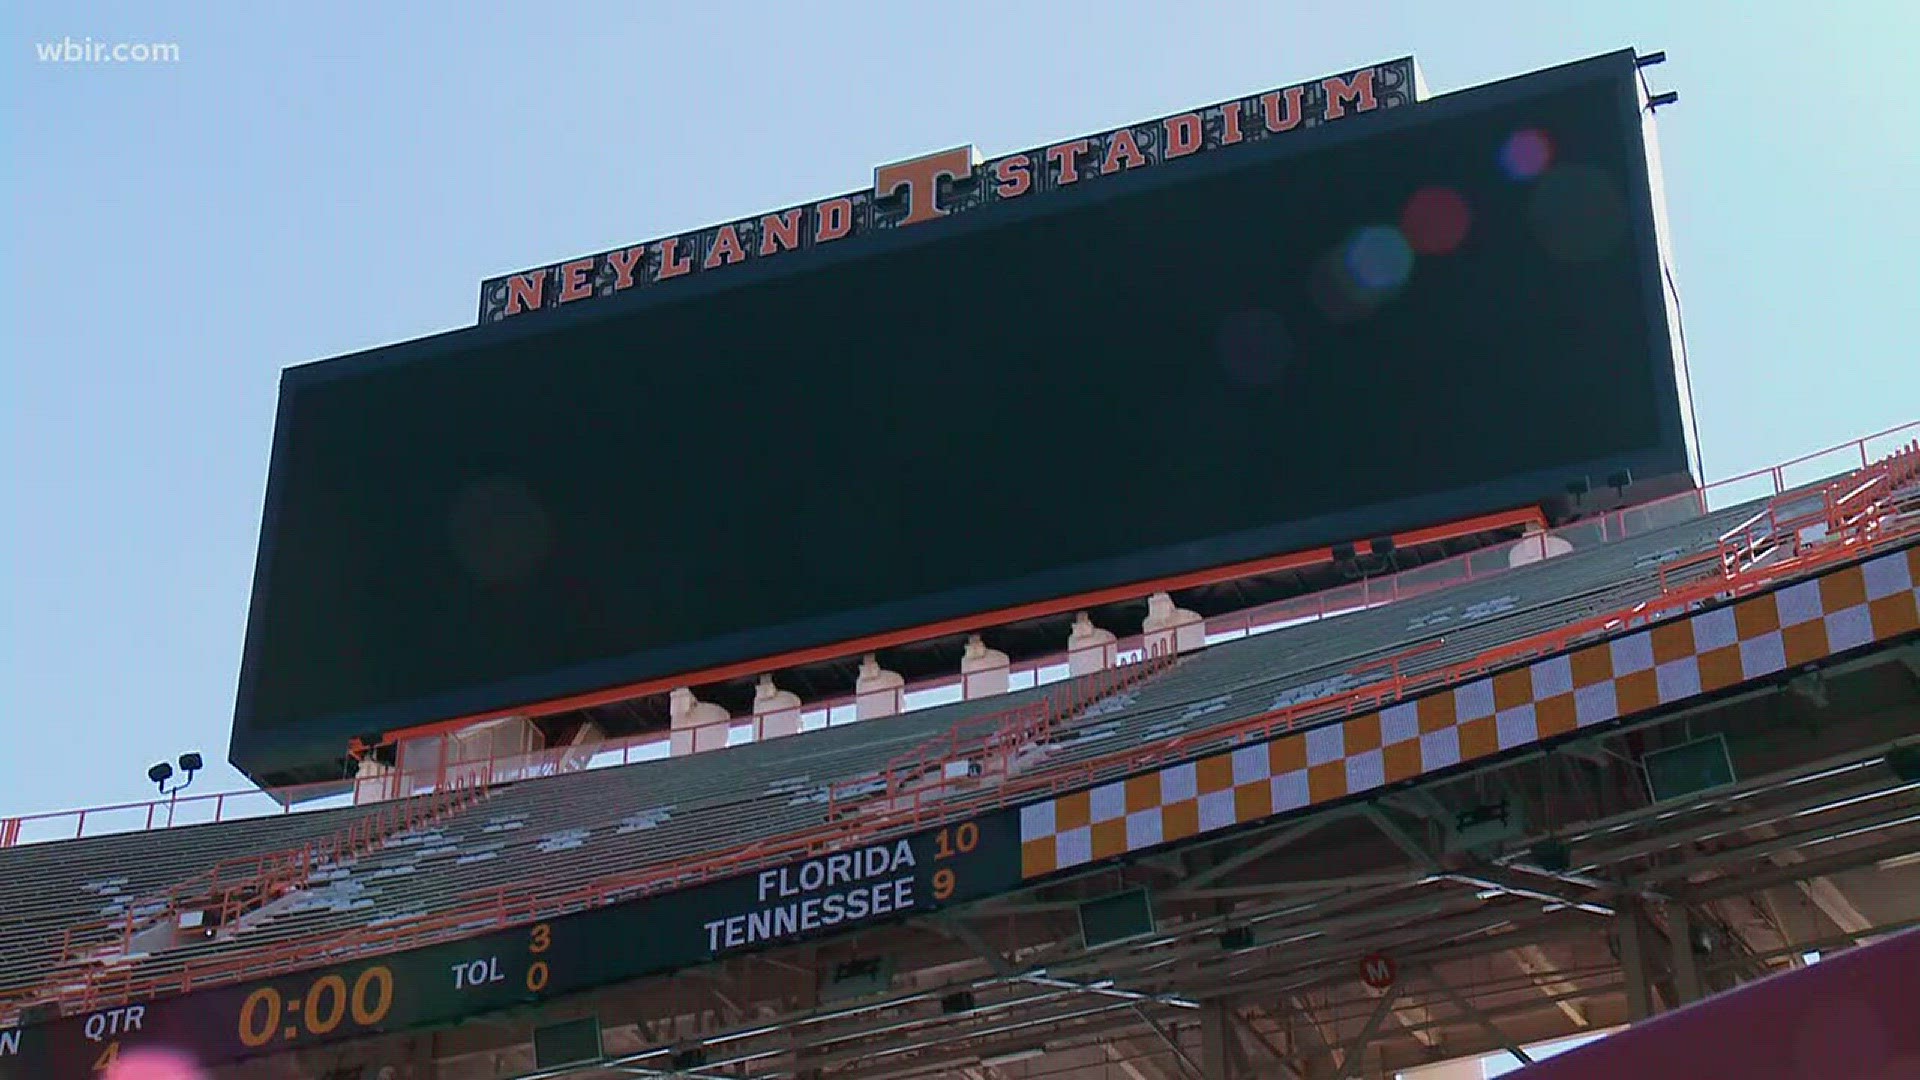 Nov. 2, 2017: As the UT Board of Trustees considers raising the budget for Neyland Stadium renovations, AD John Currie says the renovations are all about the fan experience.